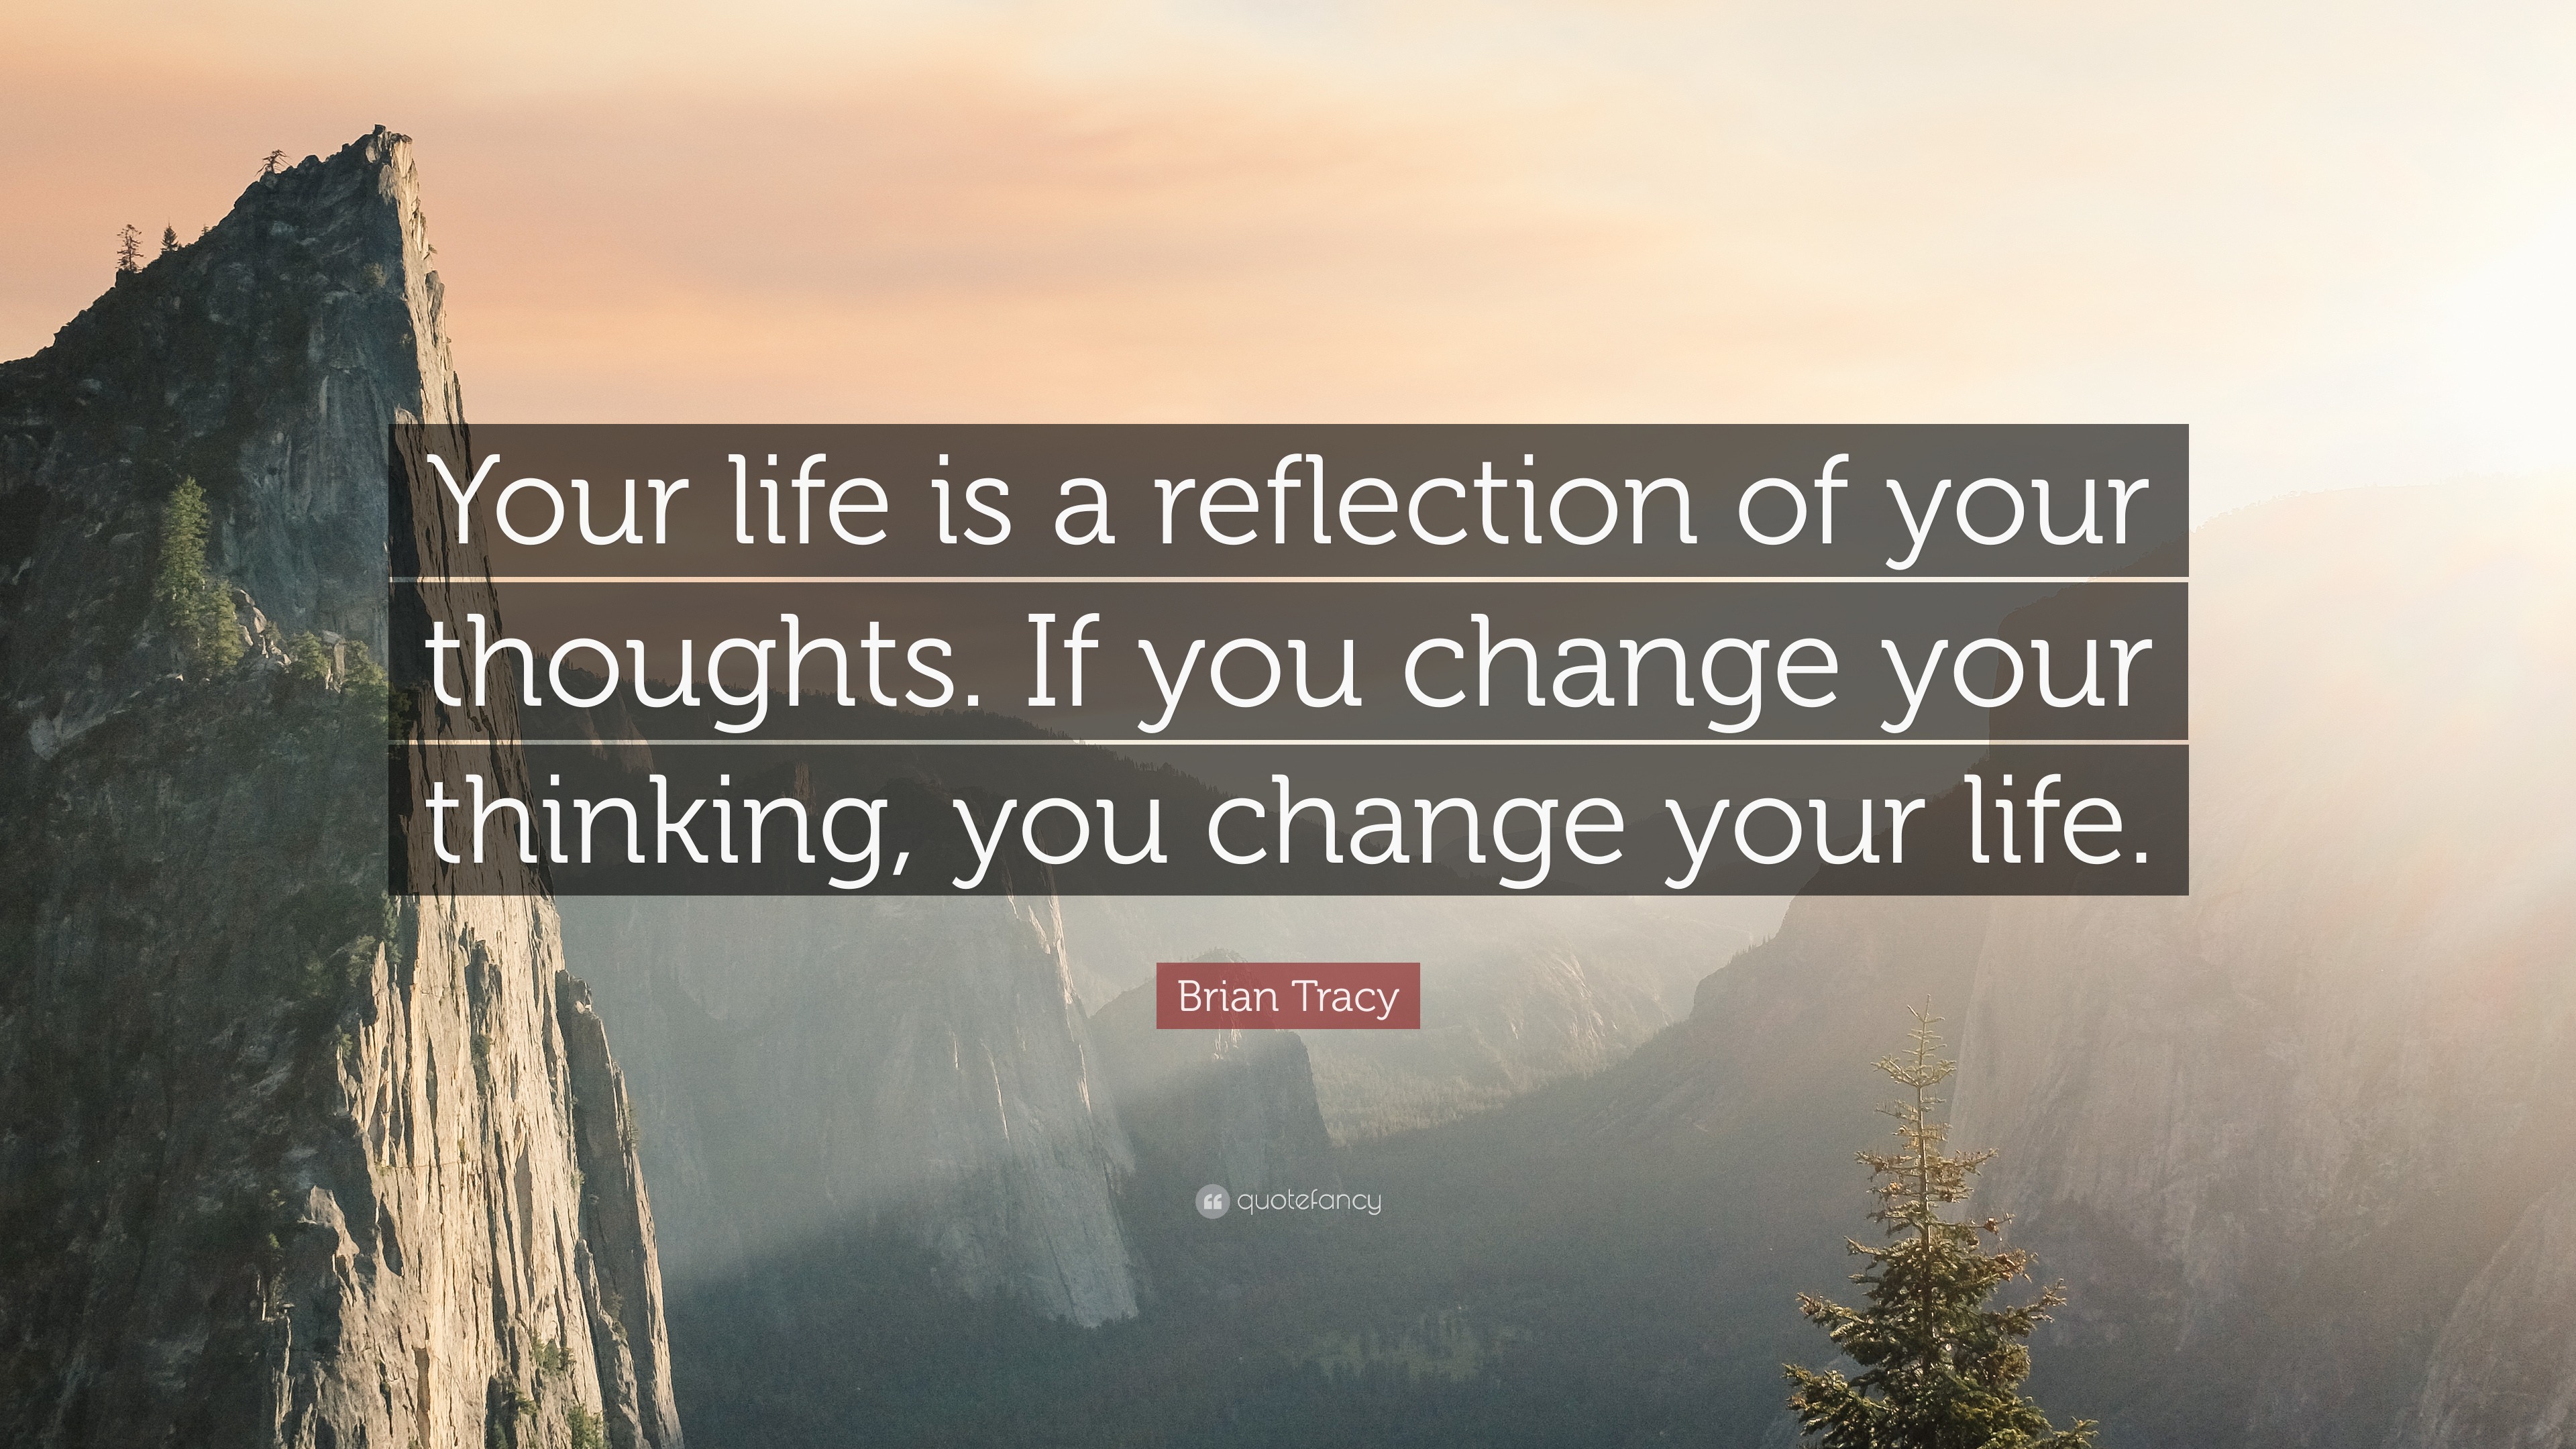 Brian Tracy Quote: “Your life is a reflection of your thoughts. If you